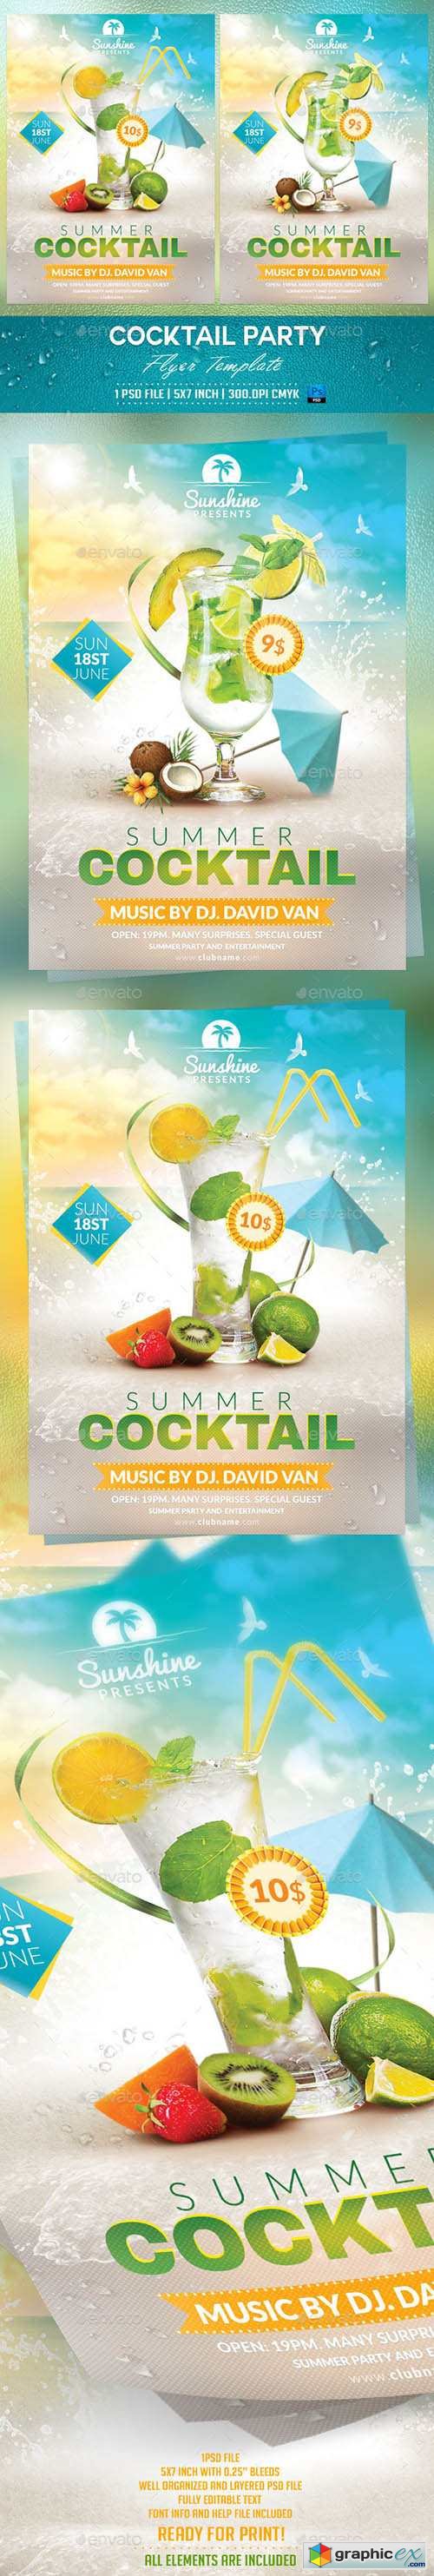 Cocktail Party Flyer Template 10540507